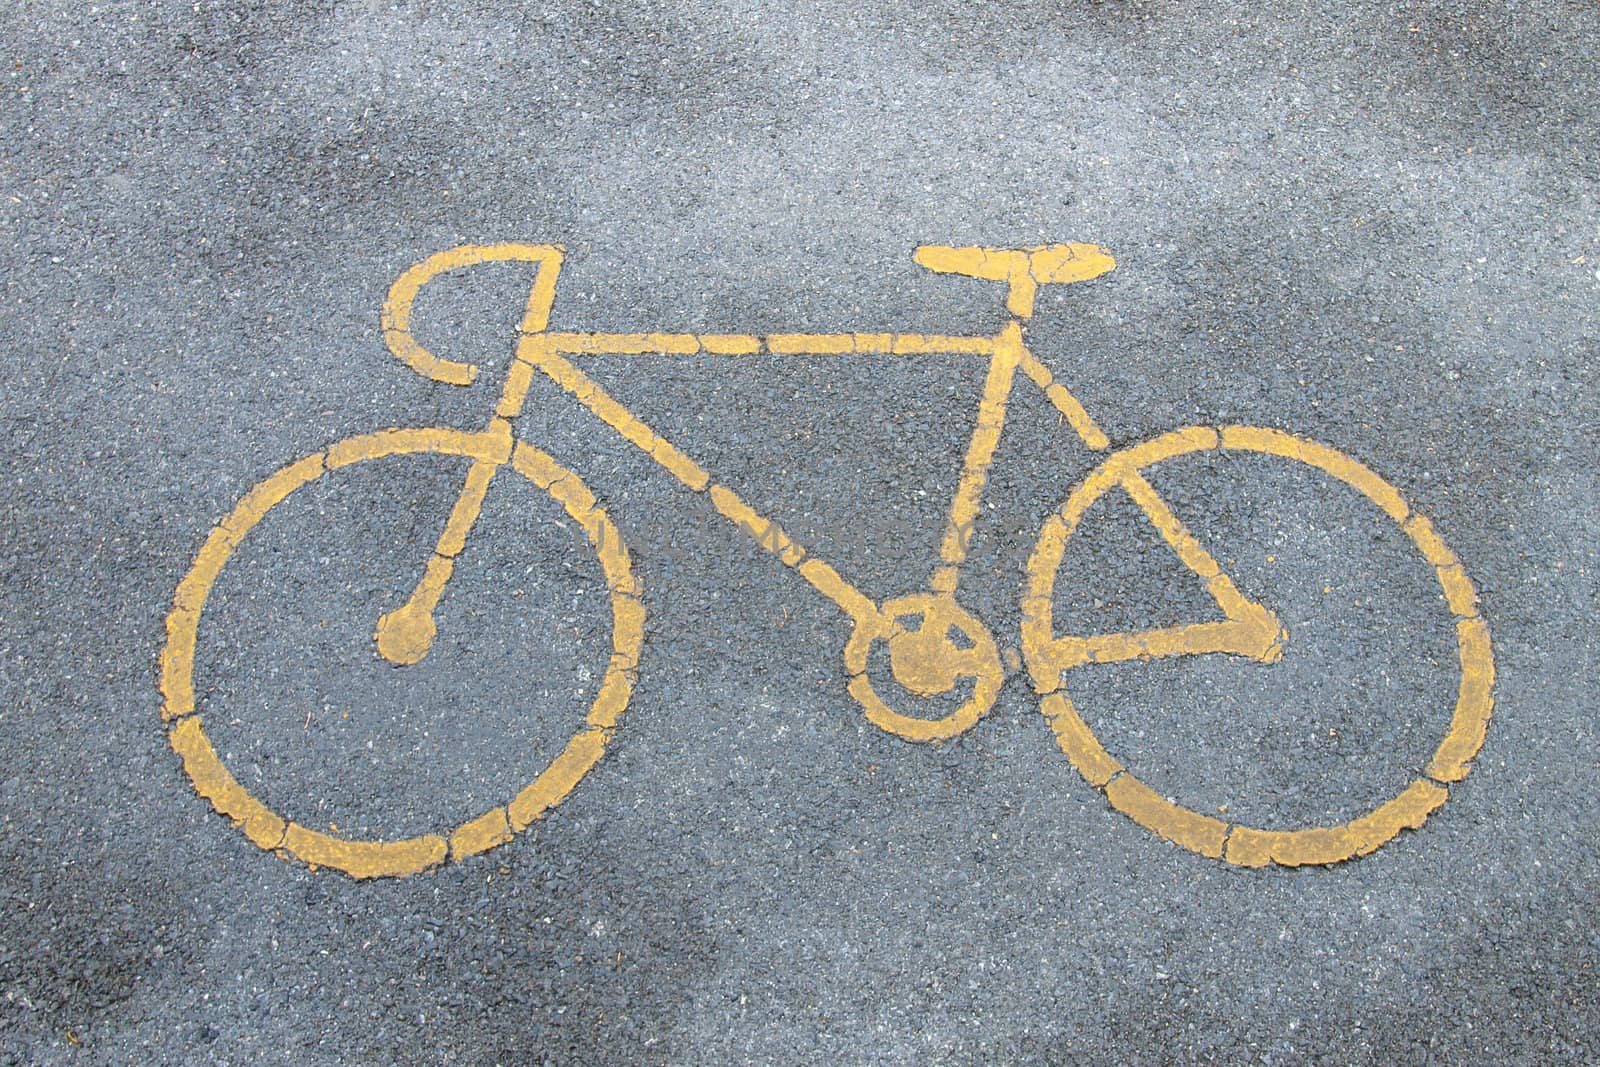 Bicycle road sign painted on the pavement.